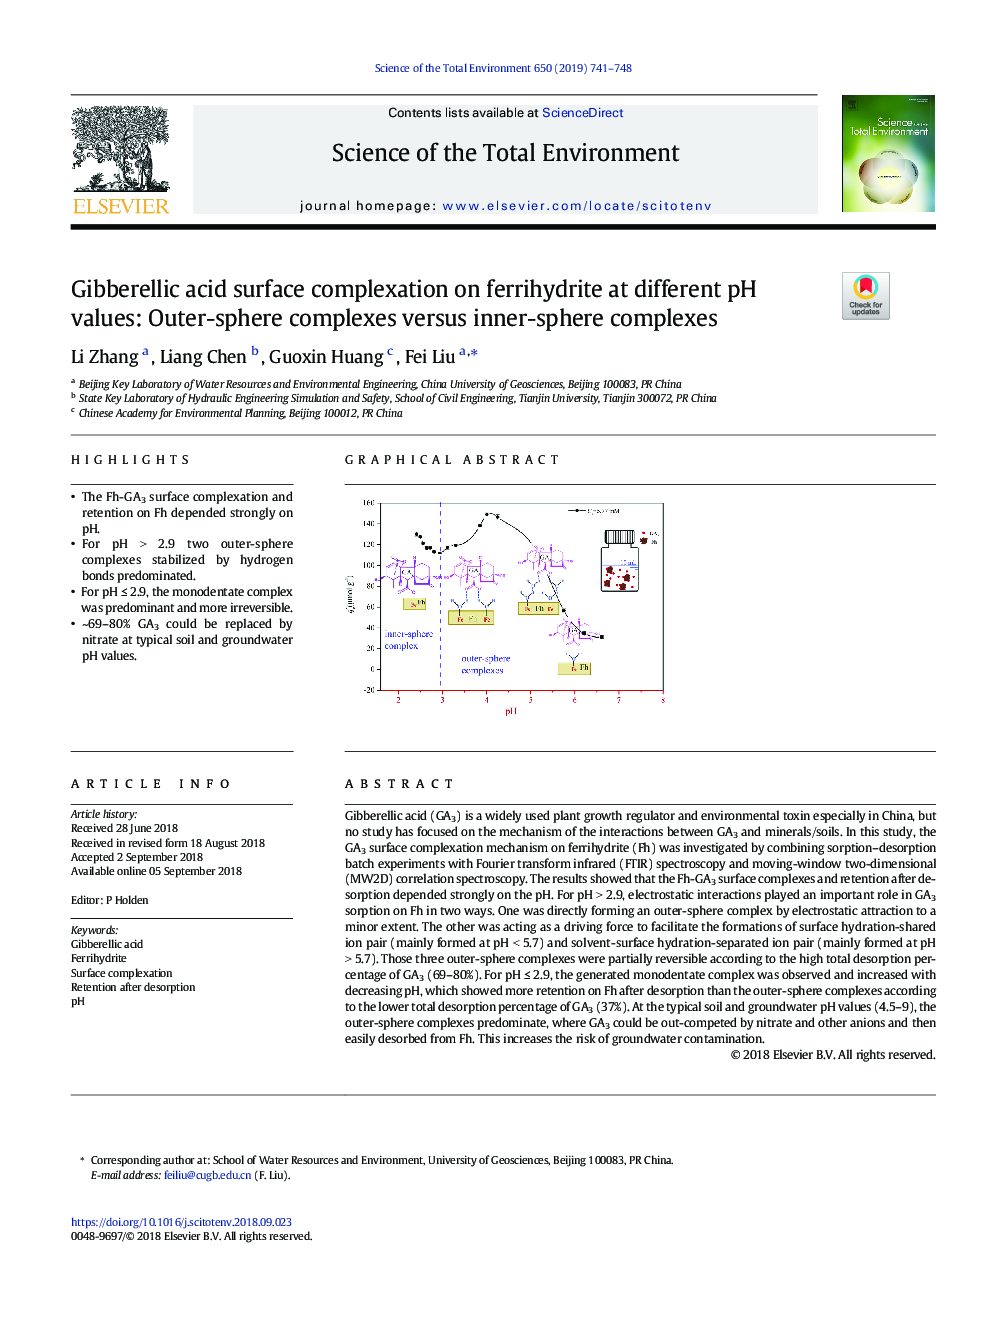 Gibberellic acid surface complexation on ferrihydrite at different pH values: Outer-sphere complexes versus inner-sphere complexes